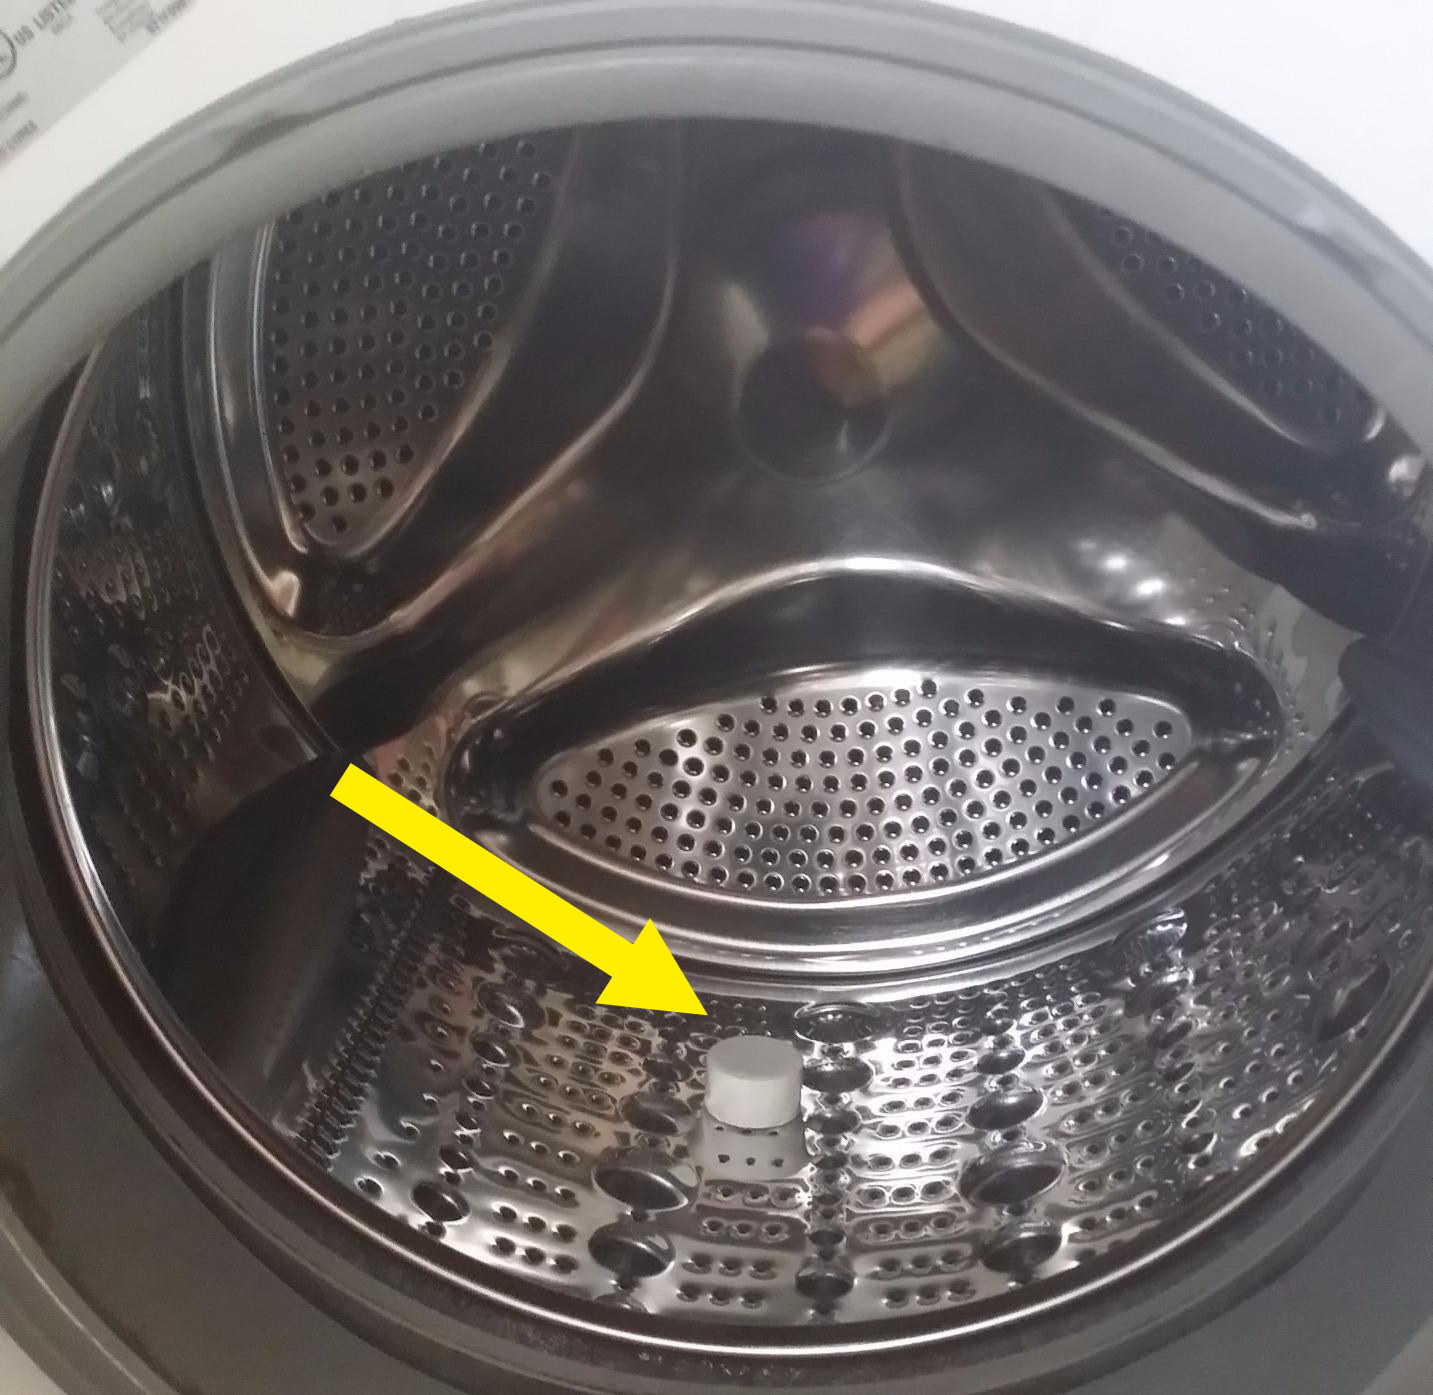 the washing machine cleaner tablet inside silver drum area of washer